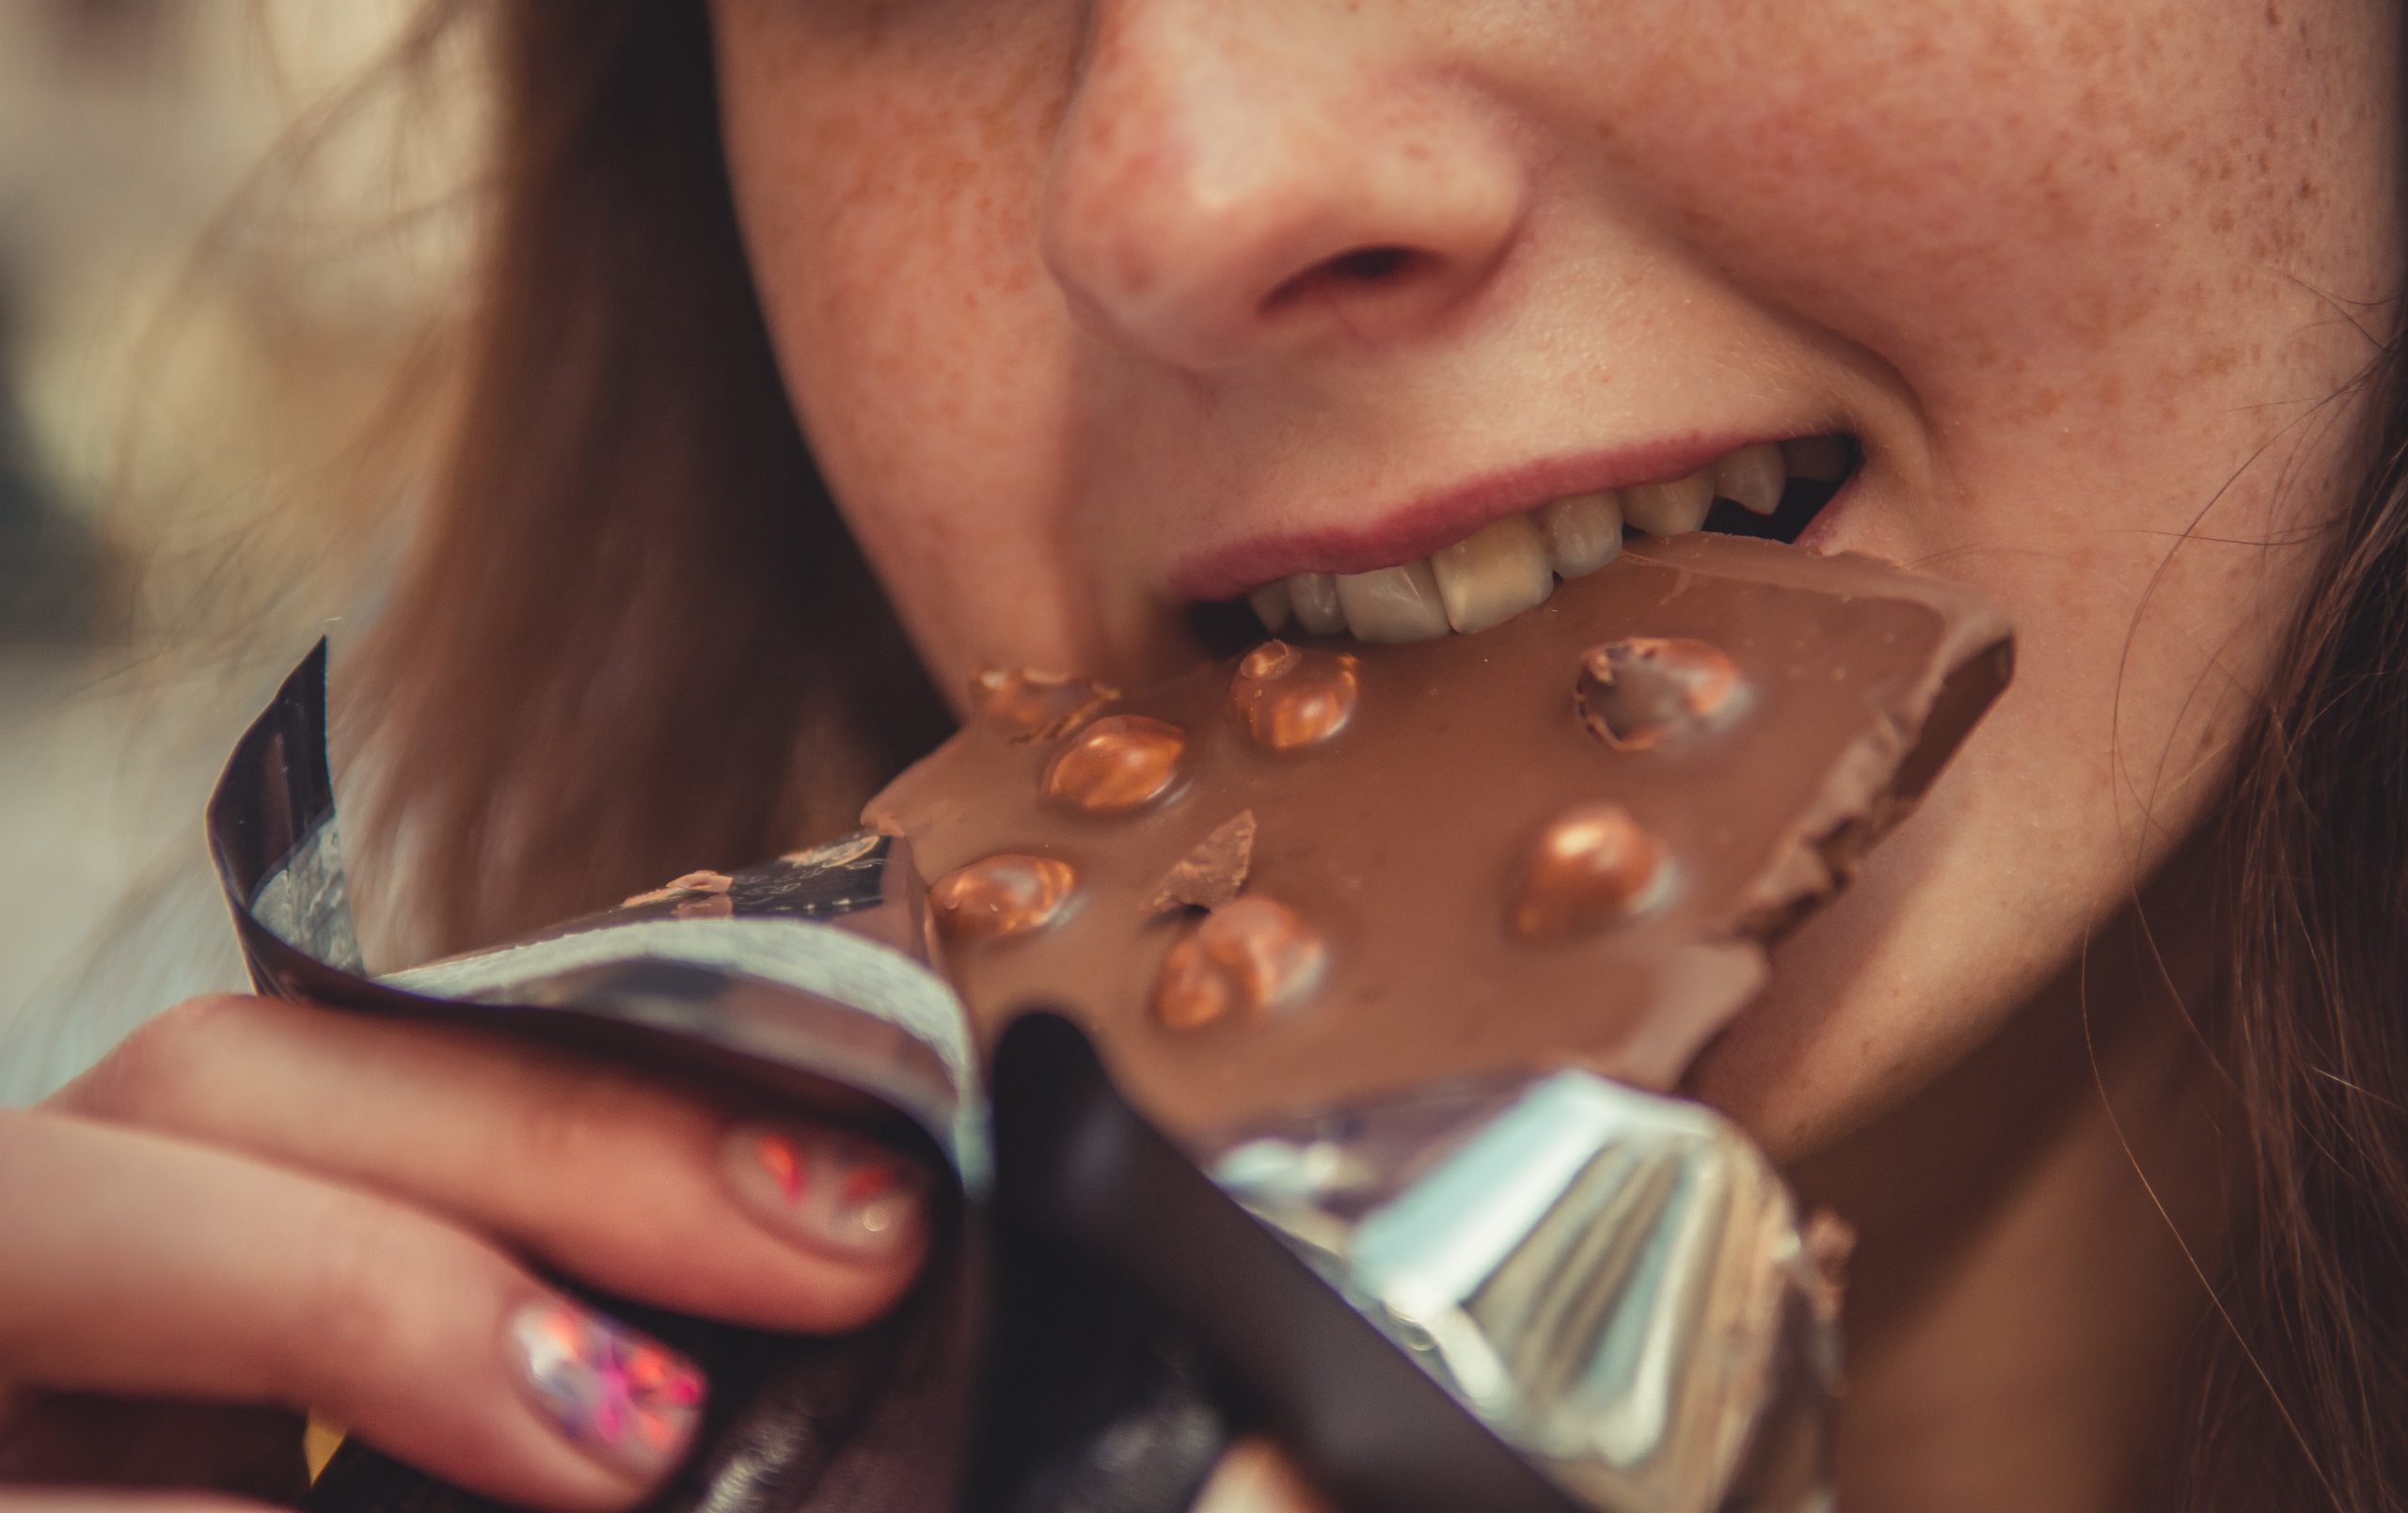 A female adolescent takes a bite of a chocolate bar.